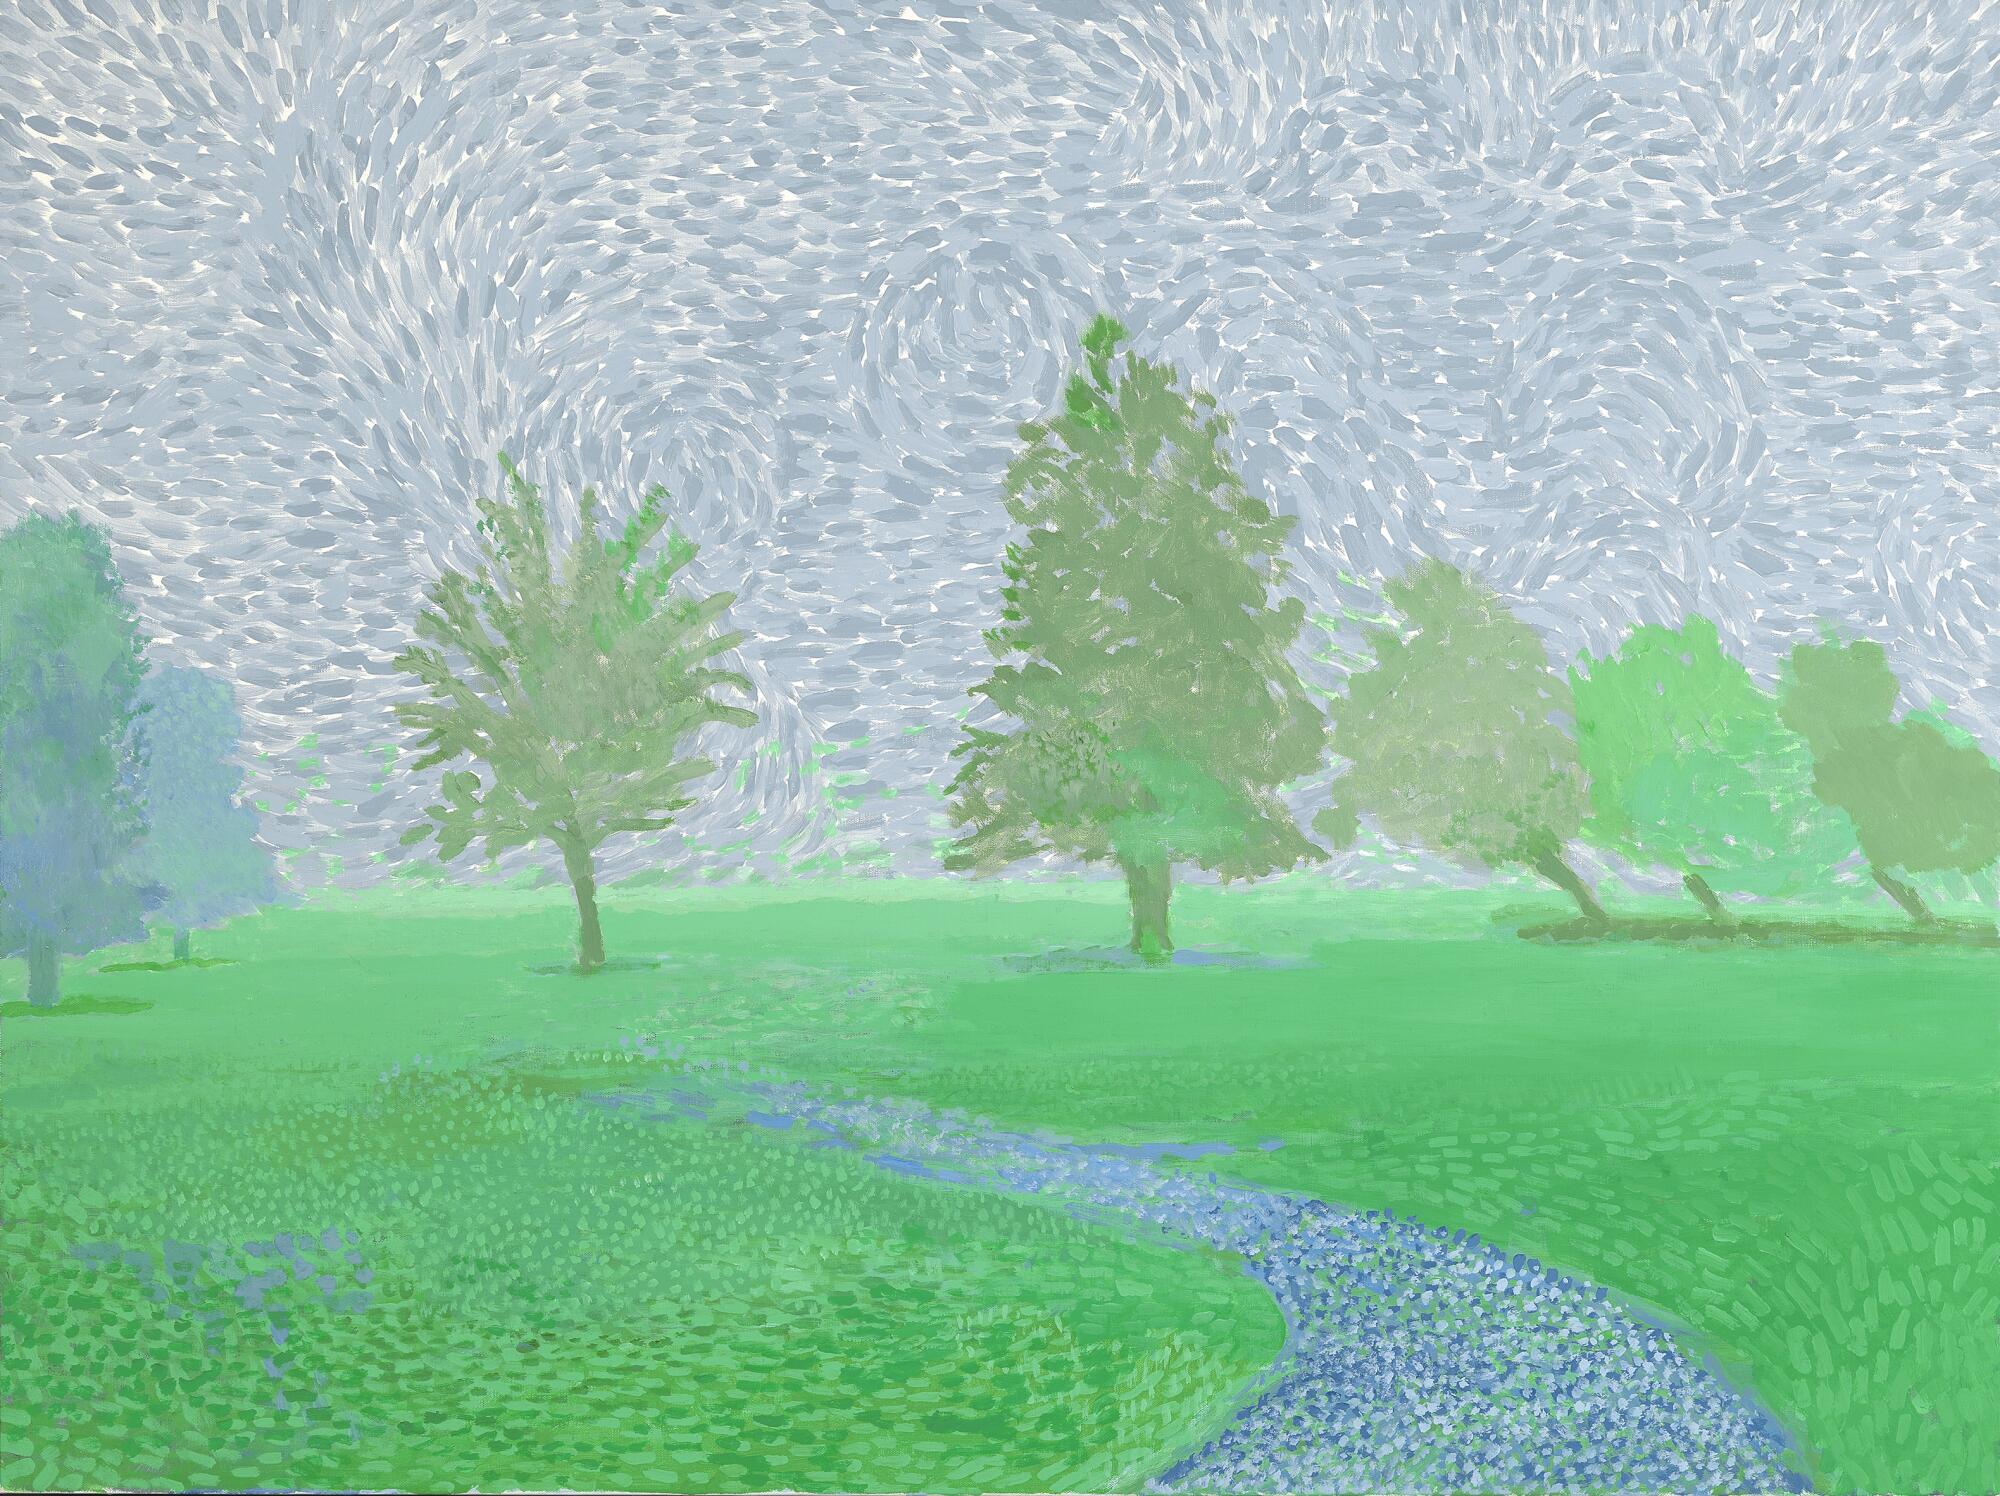 A Hockney work shows a green field with trees in the mist.